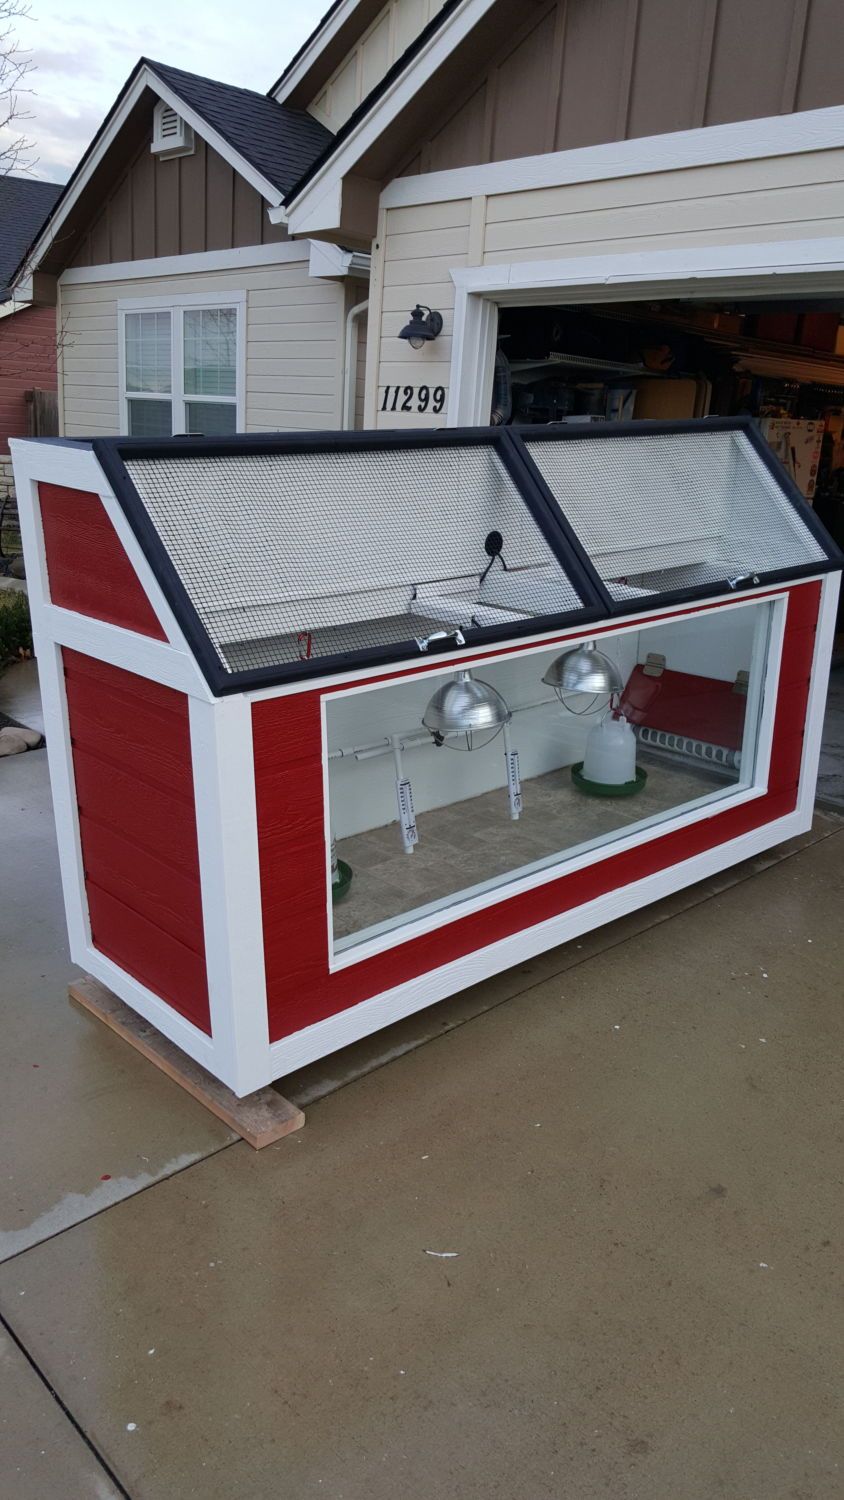 Awesome Chicken Brooder for around $200.00 BackYard 